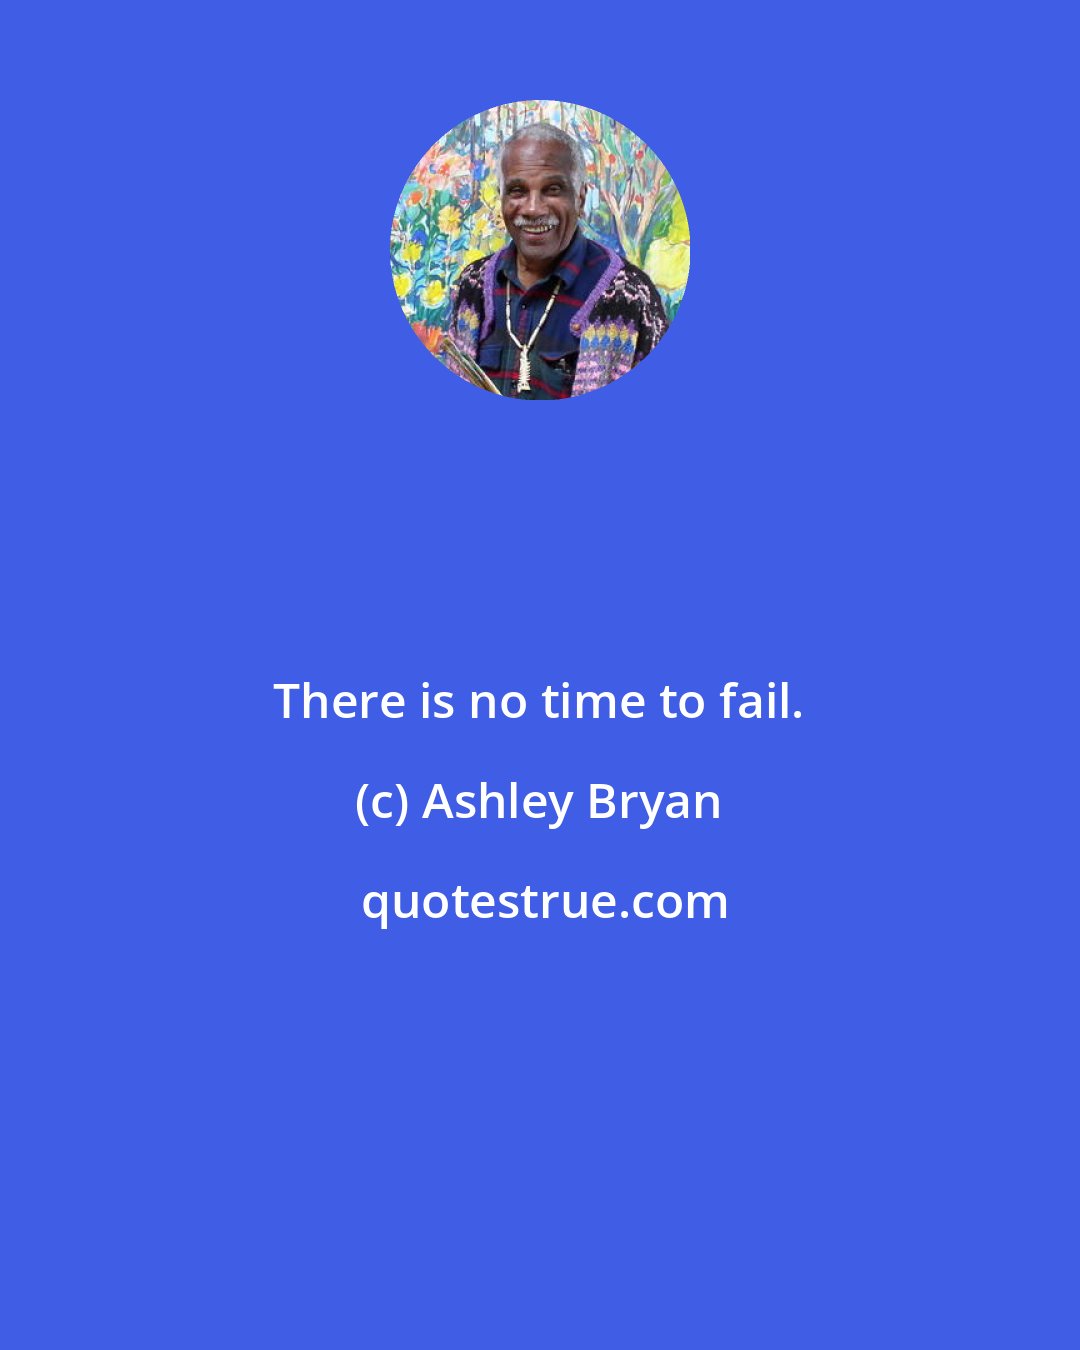 Ashley Bryan: There is no time to fail.